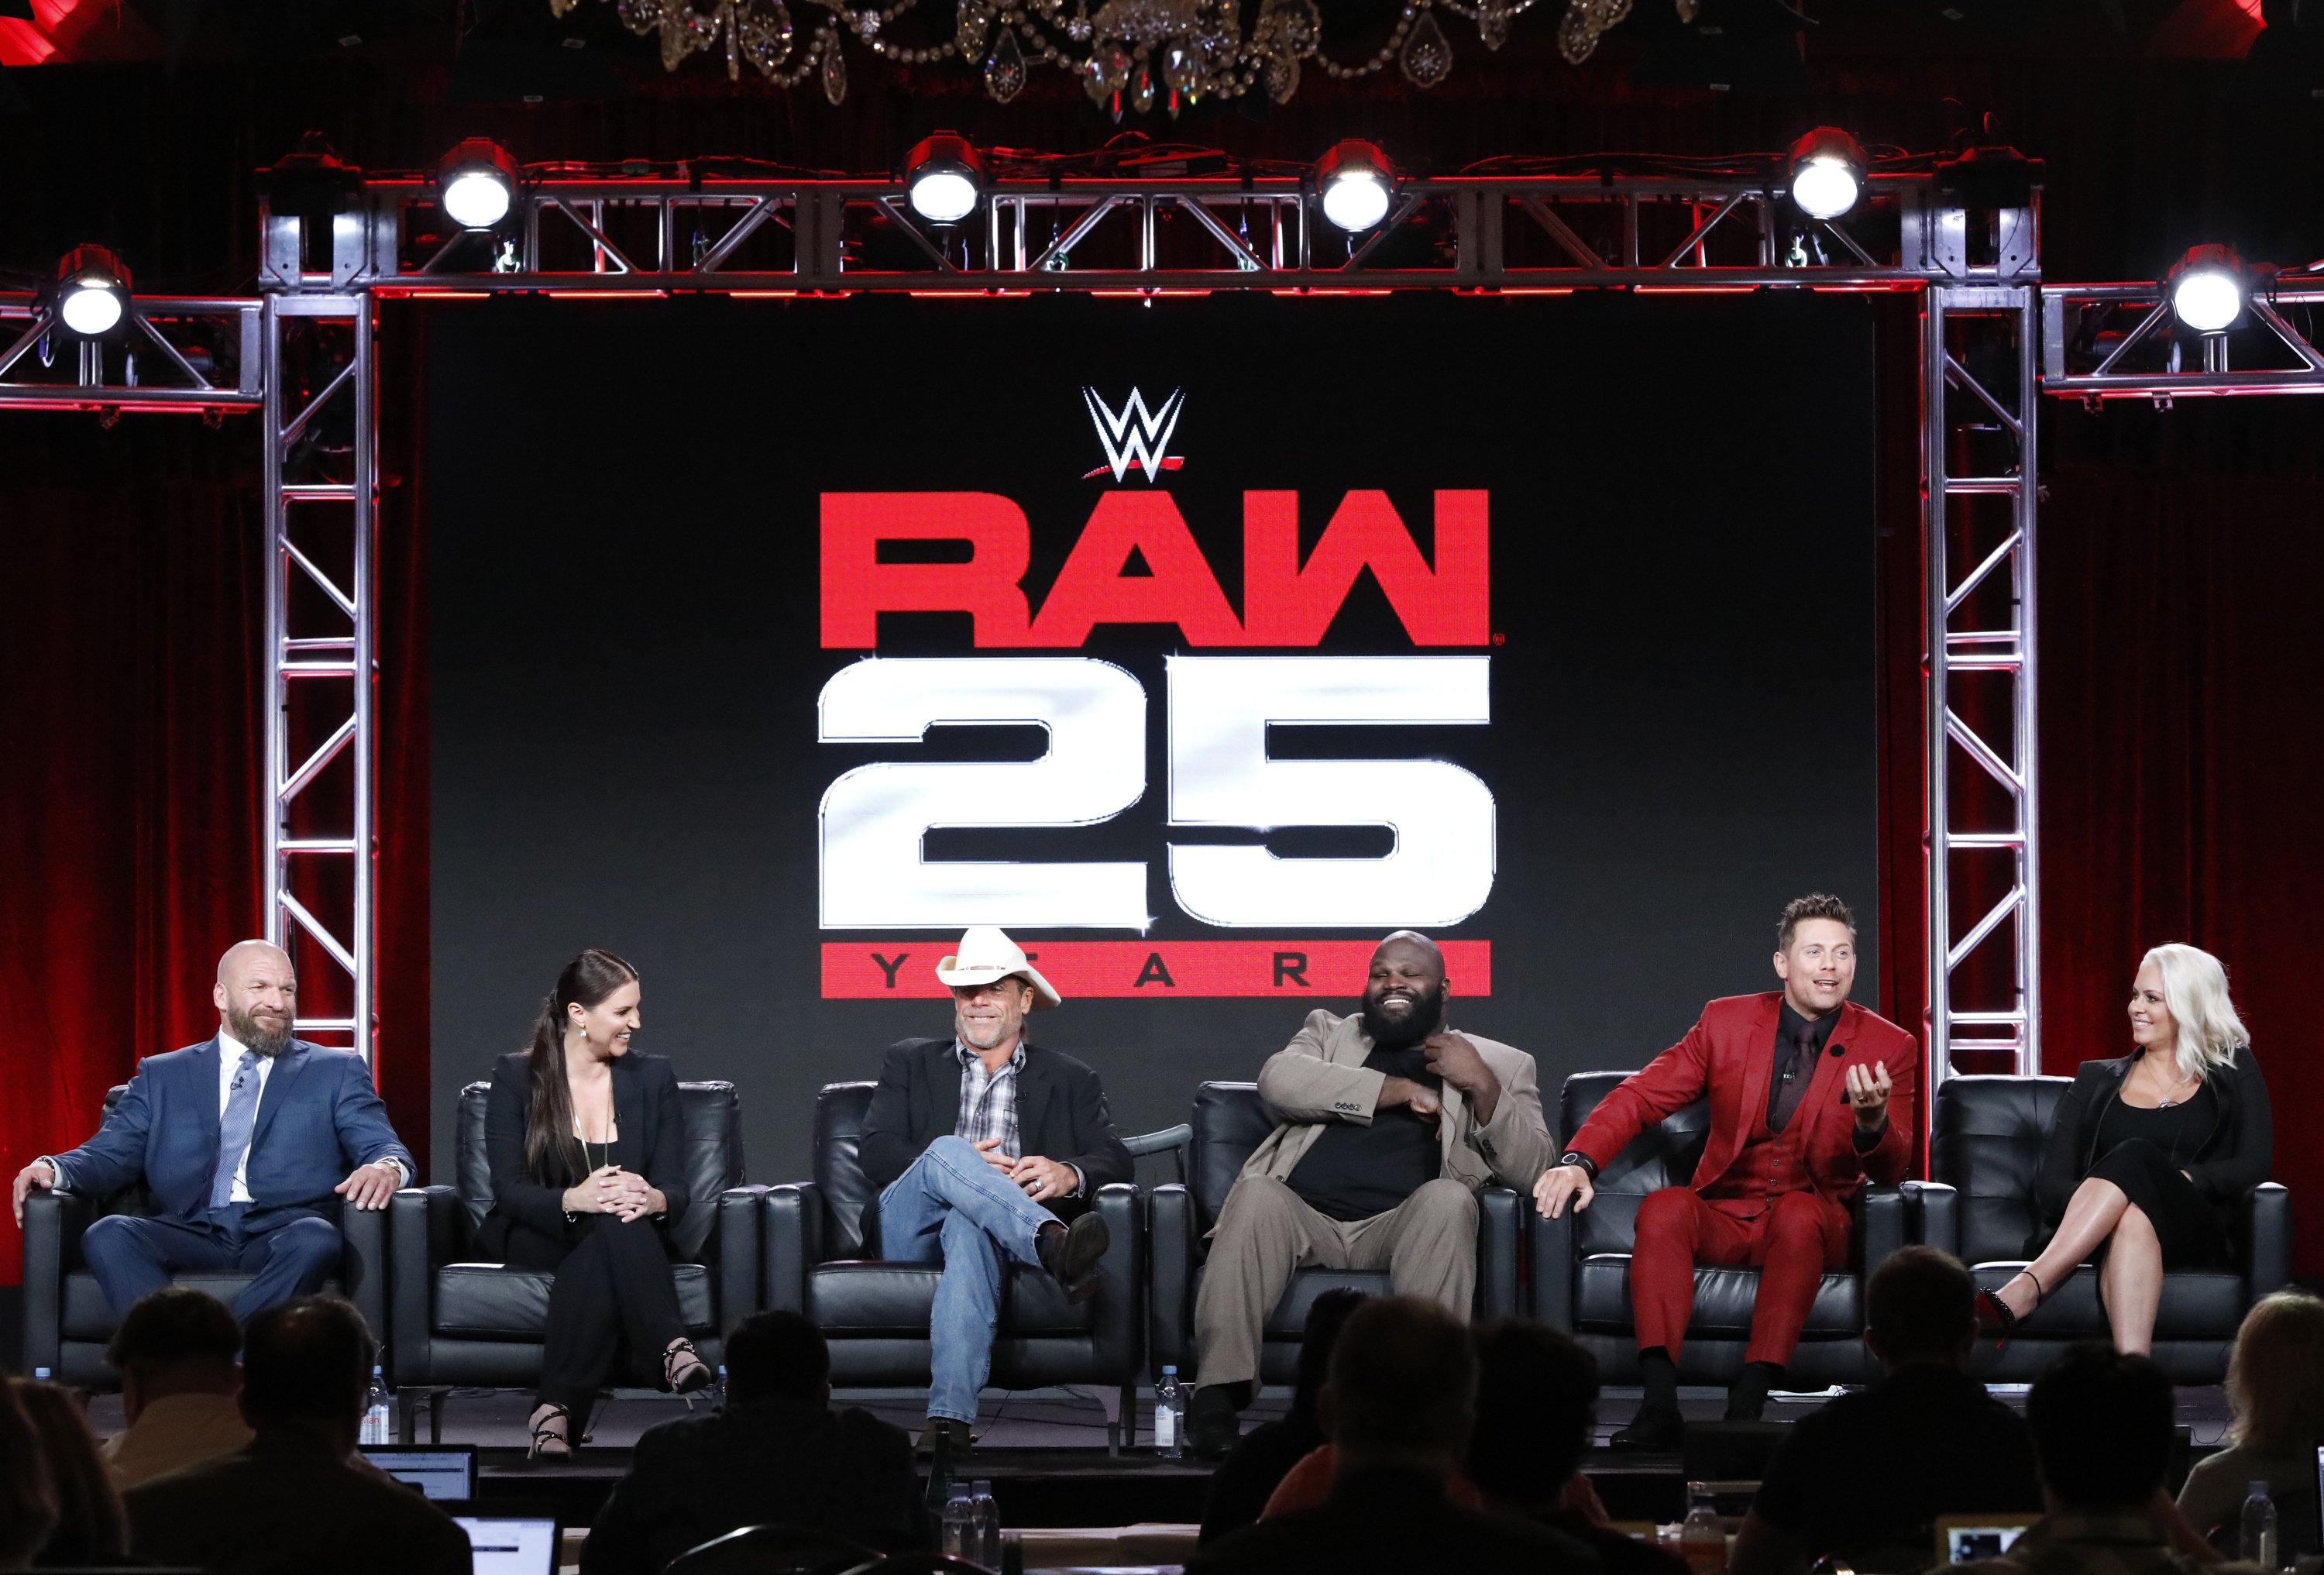 WWE RAW Social Media Score Sees Major Increase For RAW 25 Special